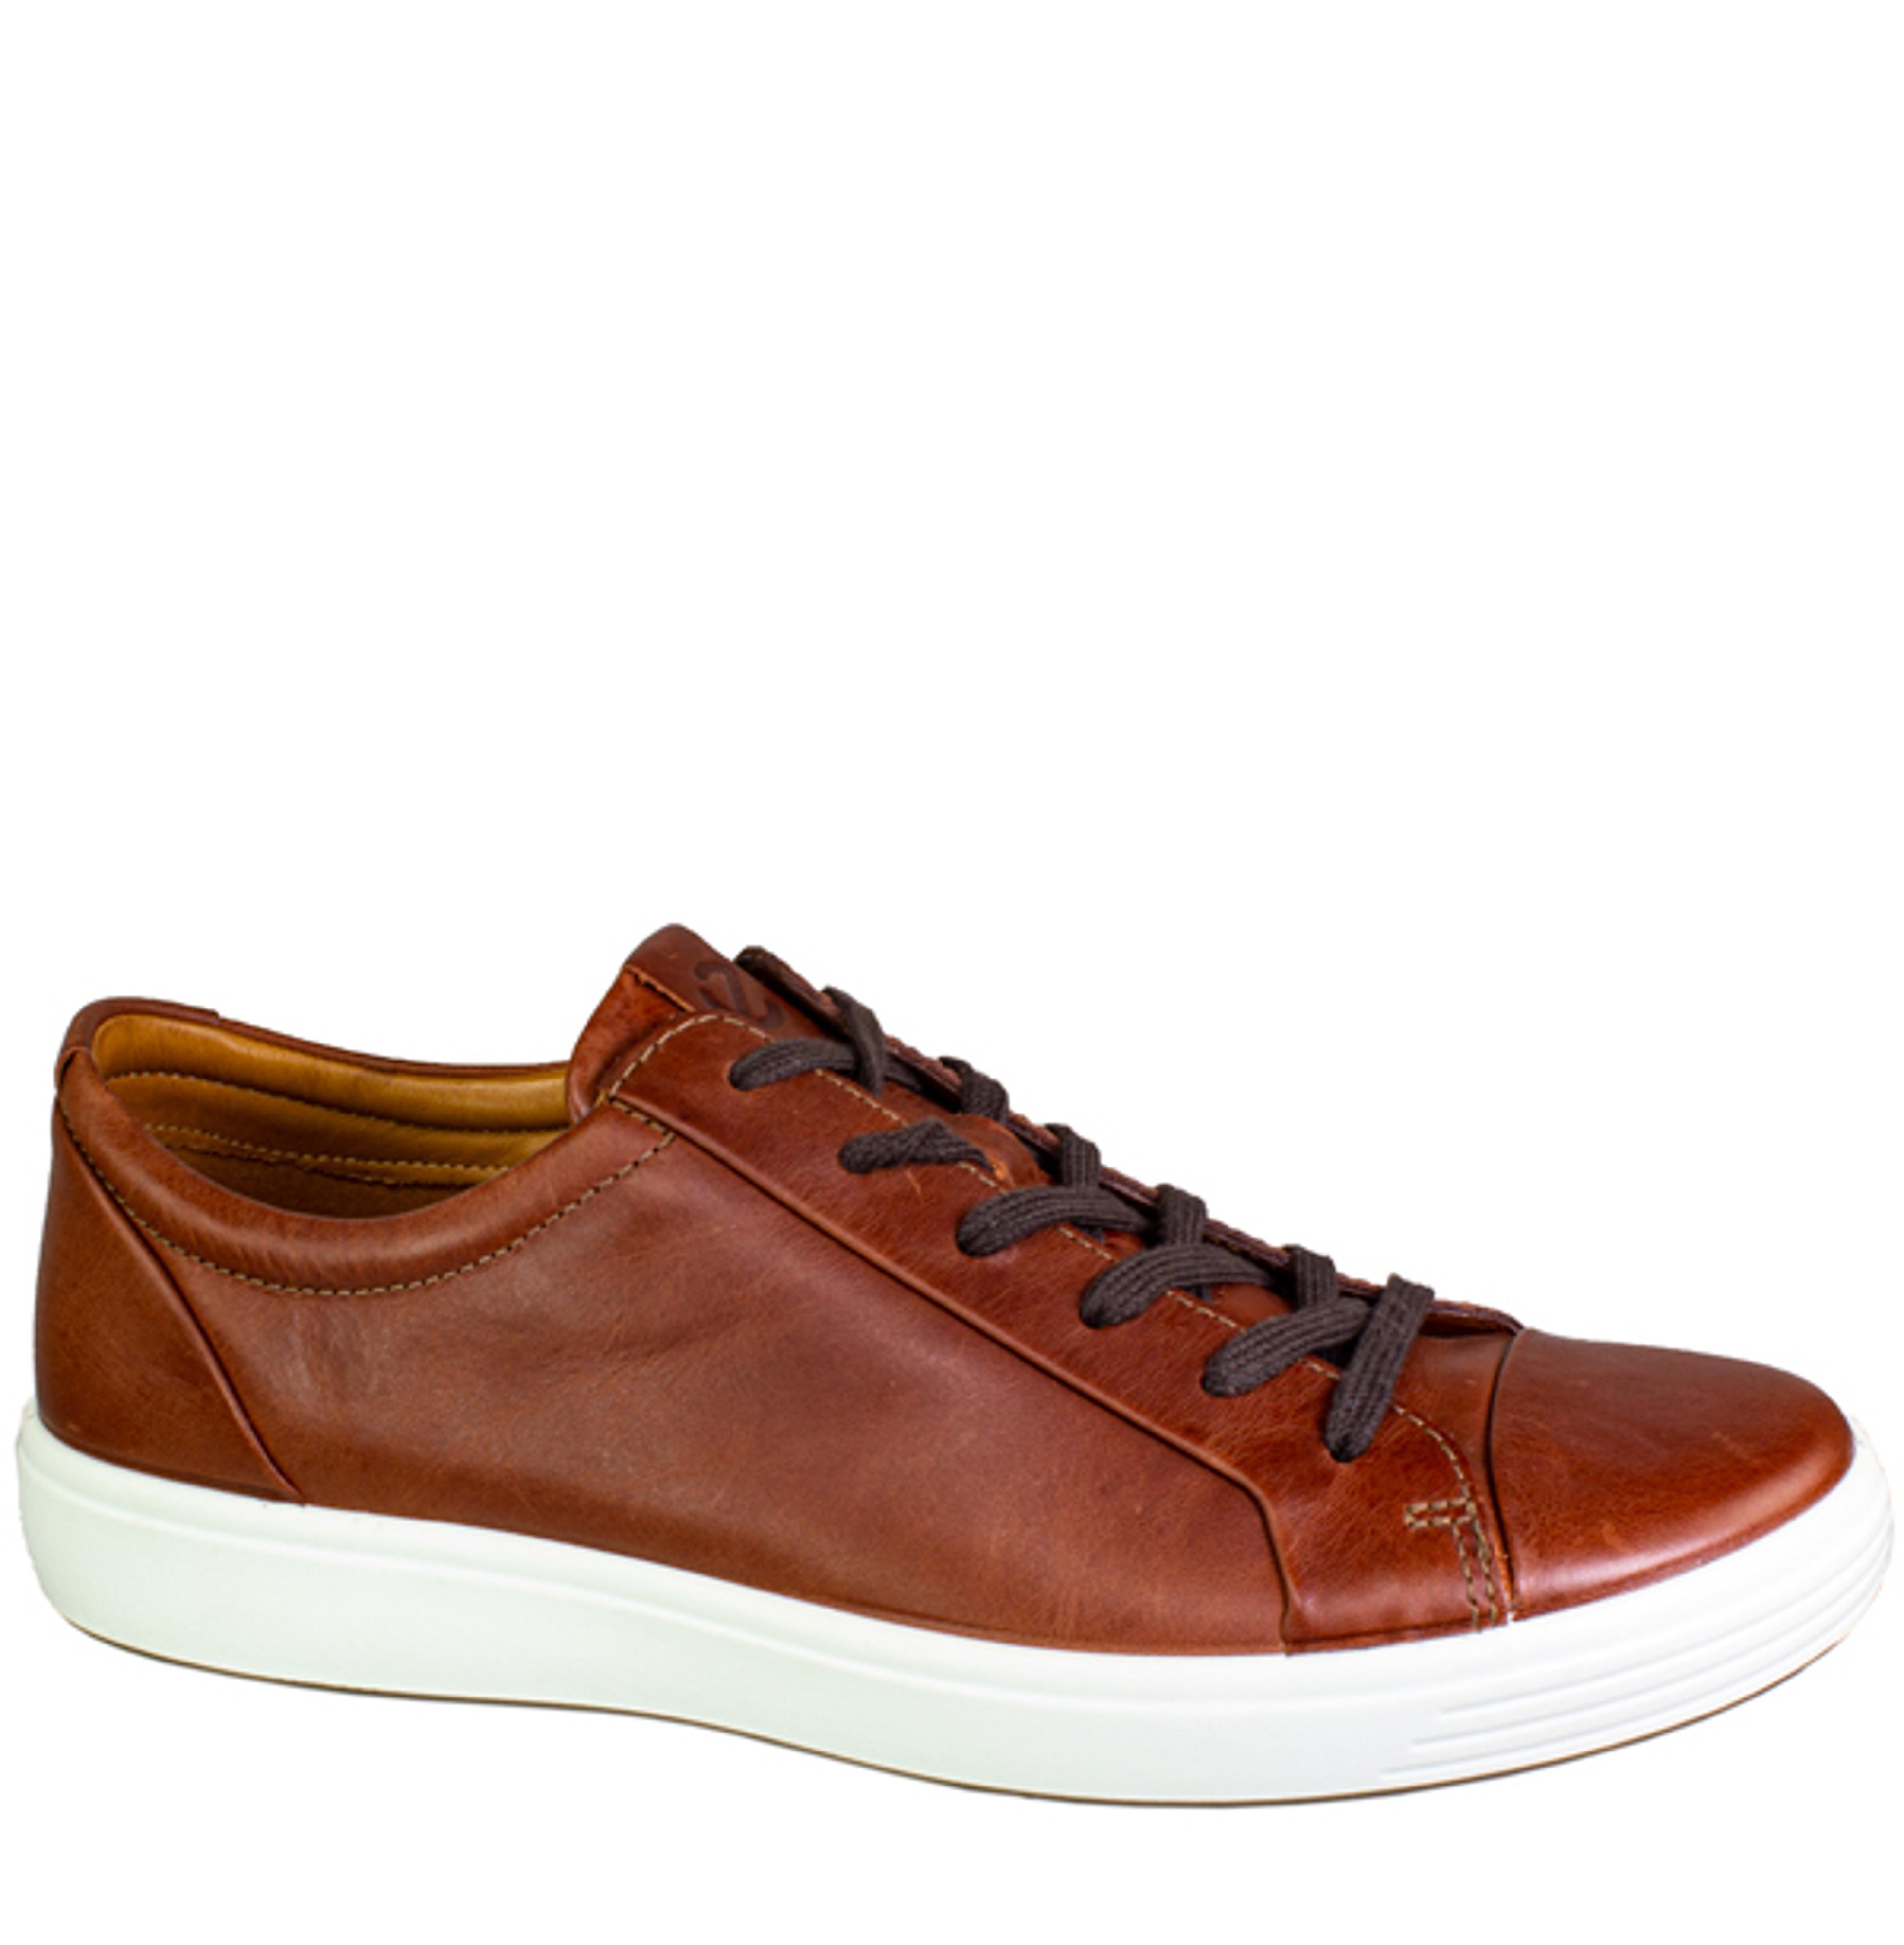 Mens 7 CITY SNEAKER / Cognac leather | Tops For Shoes